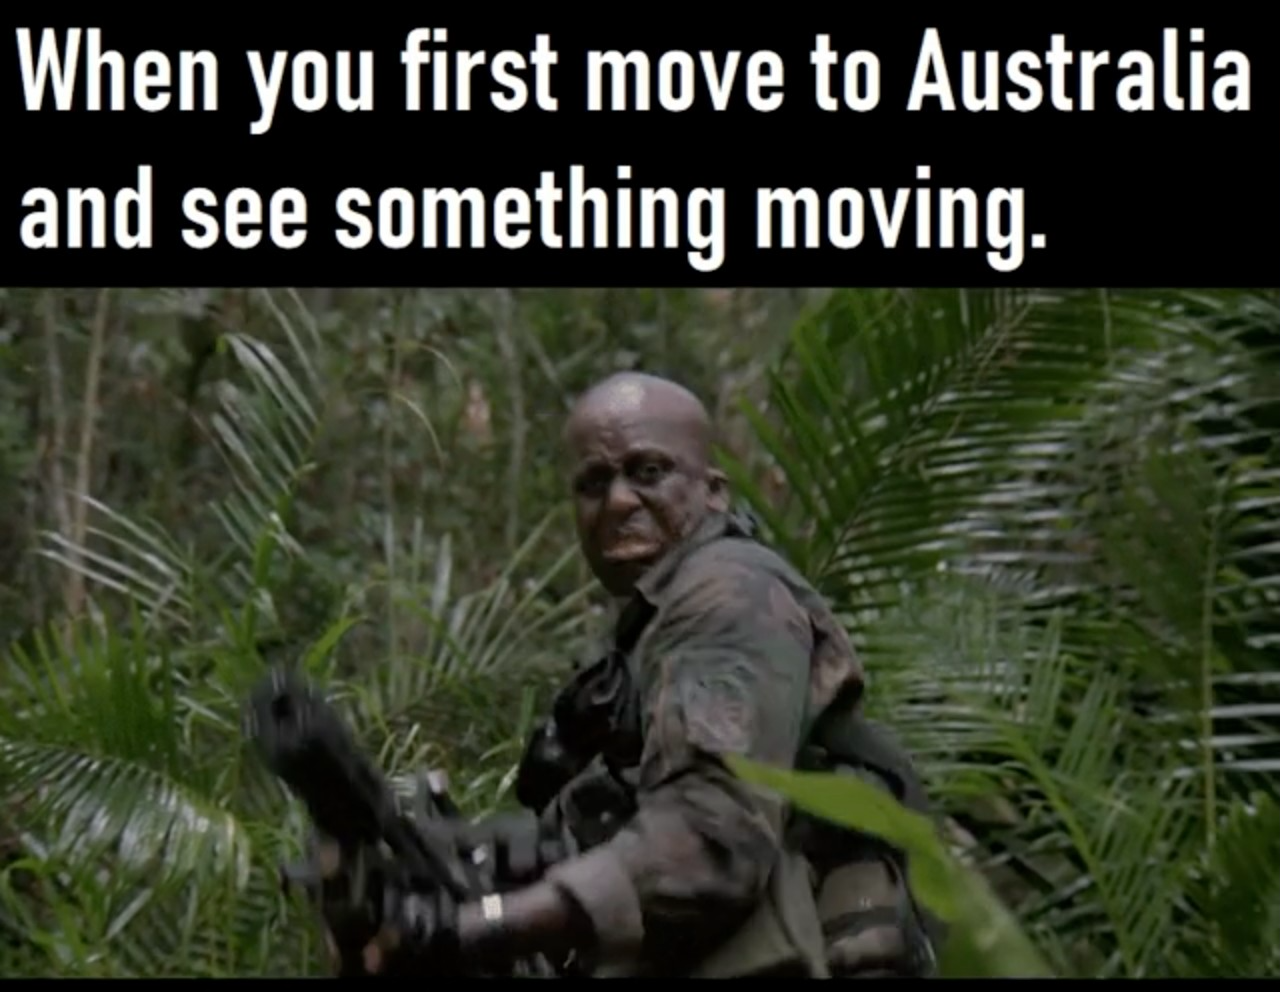 soldier - When you first move to Australia and see something moving.